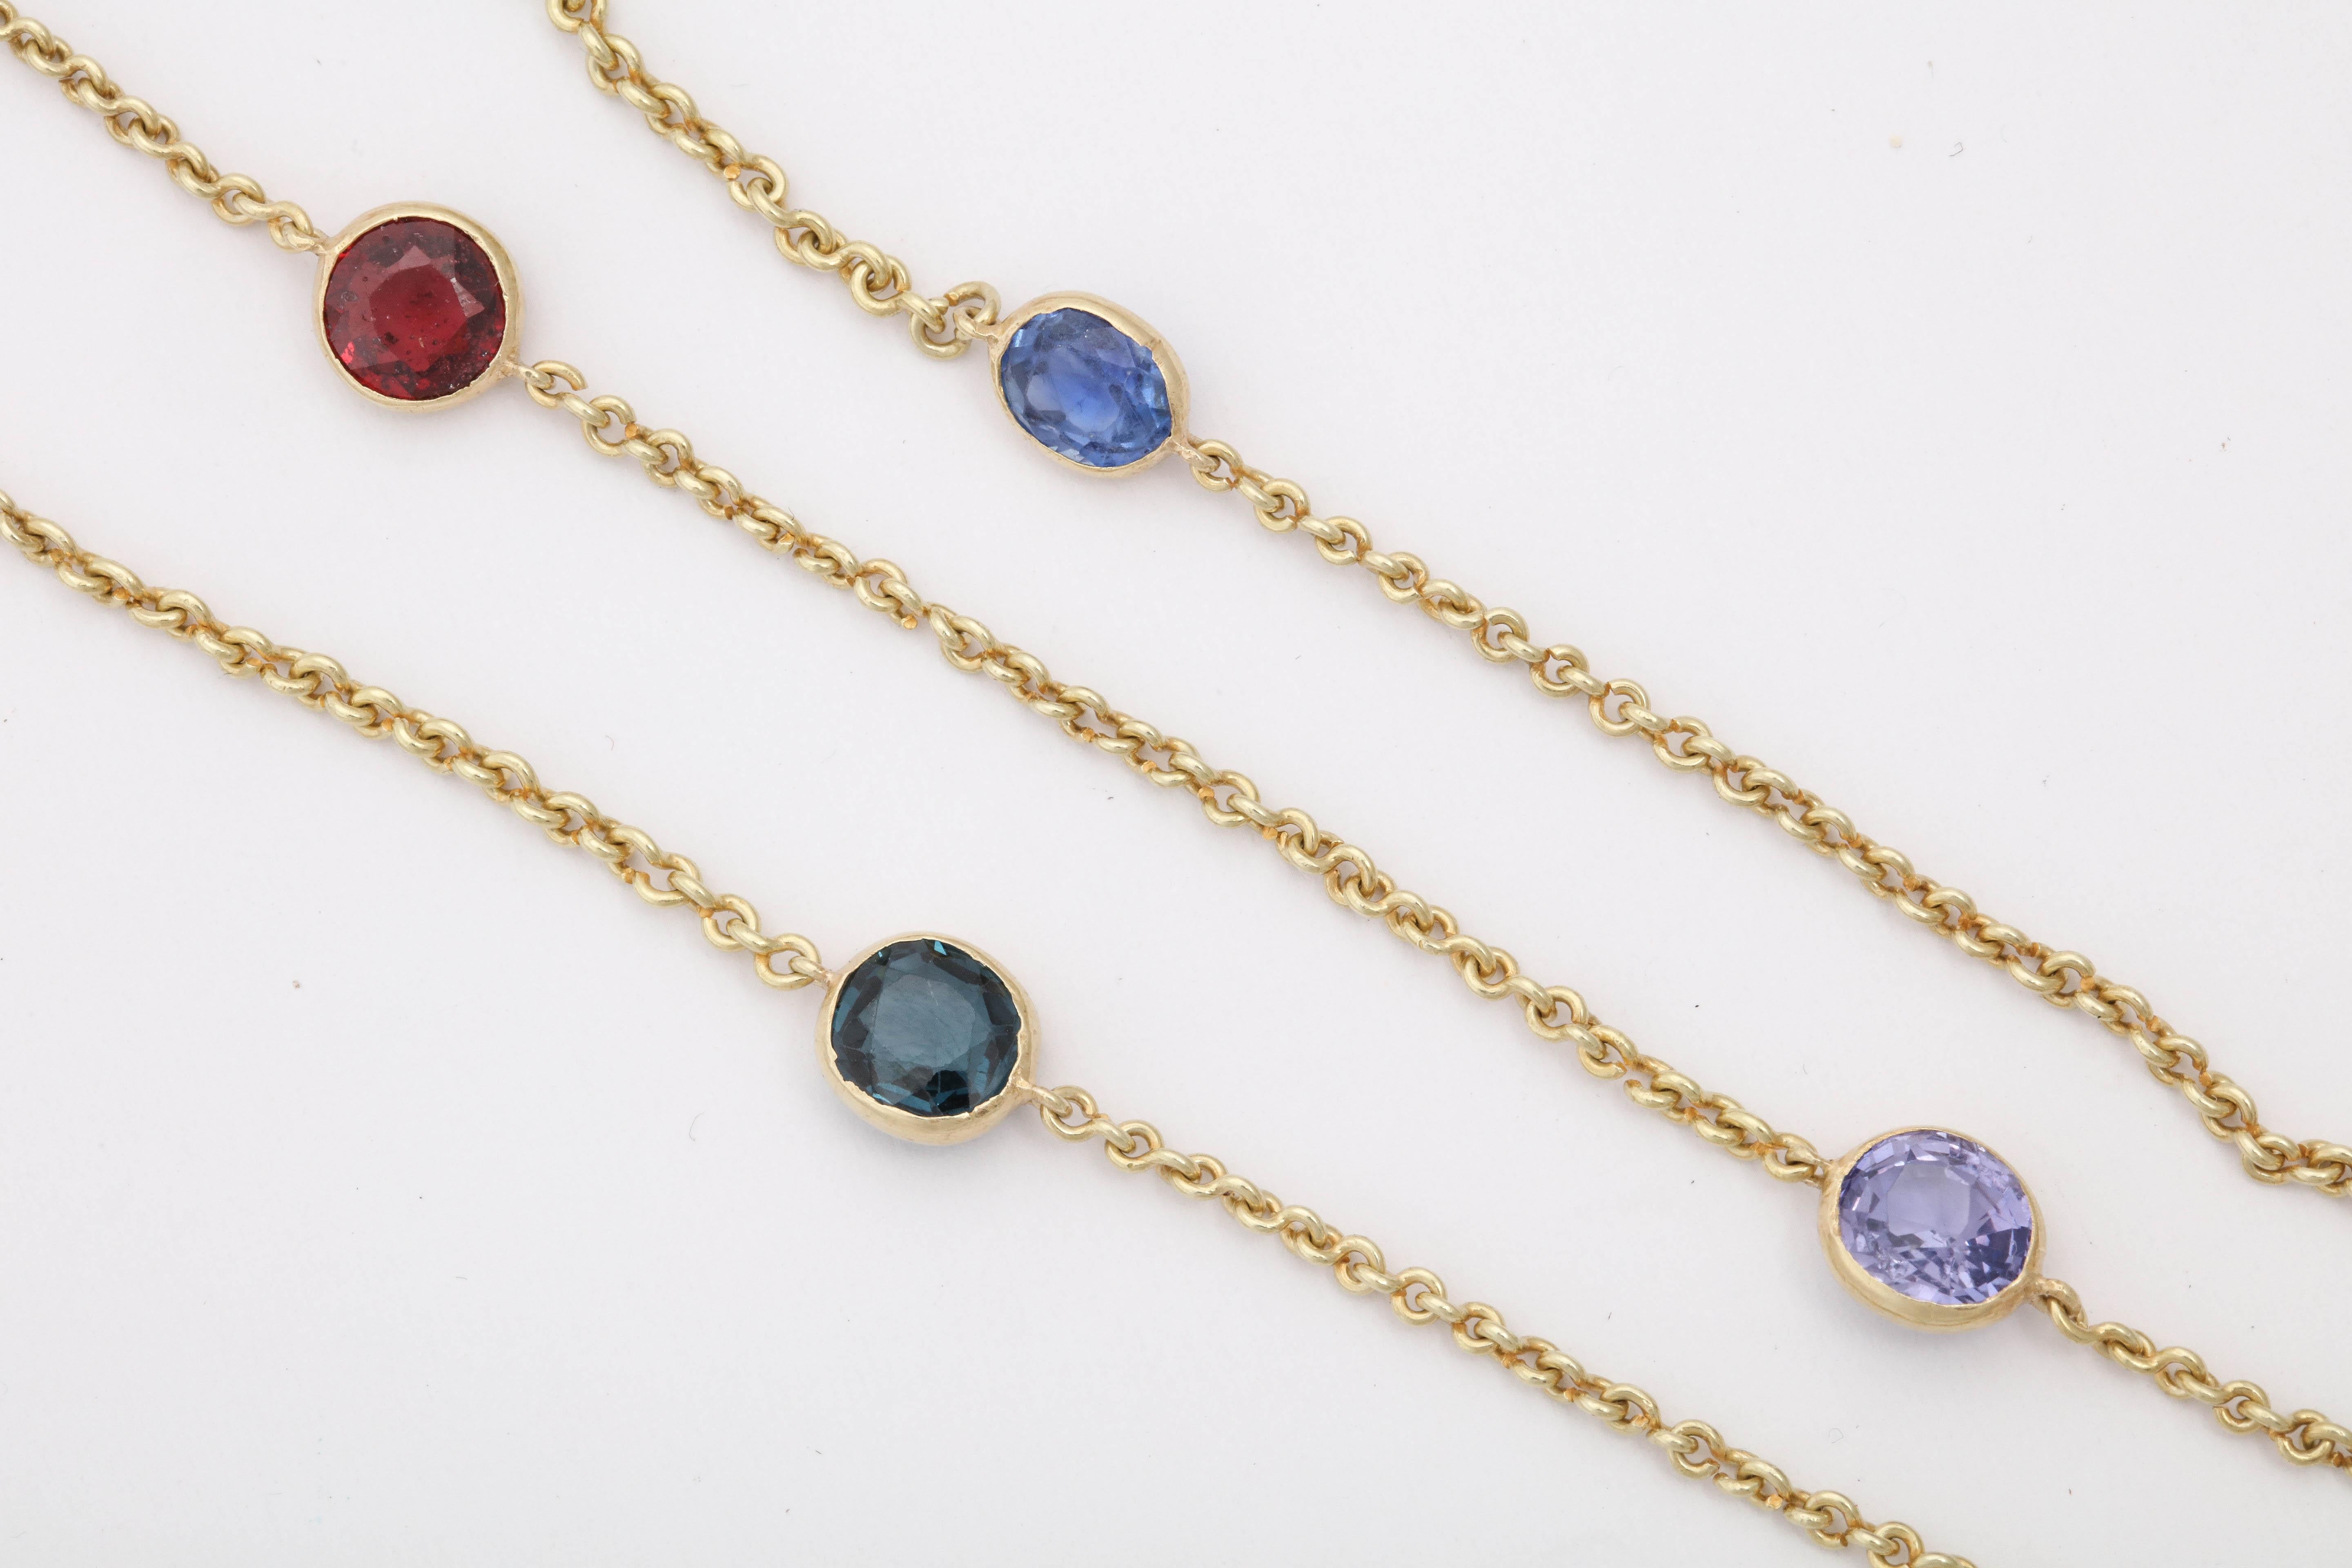 Round Cut 1930s Bezel Set Multicolored Sapphires by the Yard Long Gold Link Chain Necklace